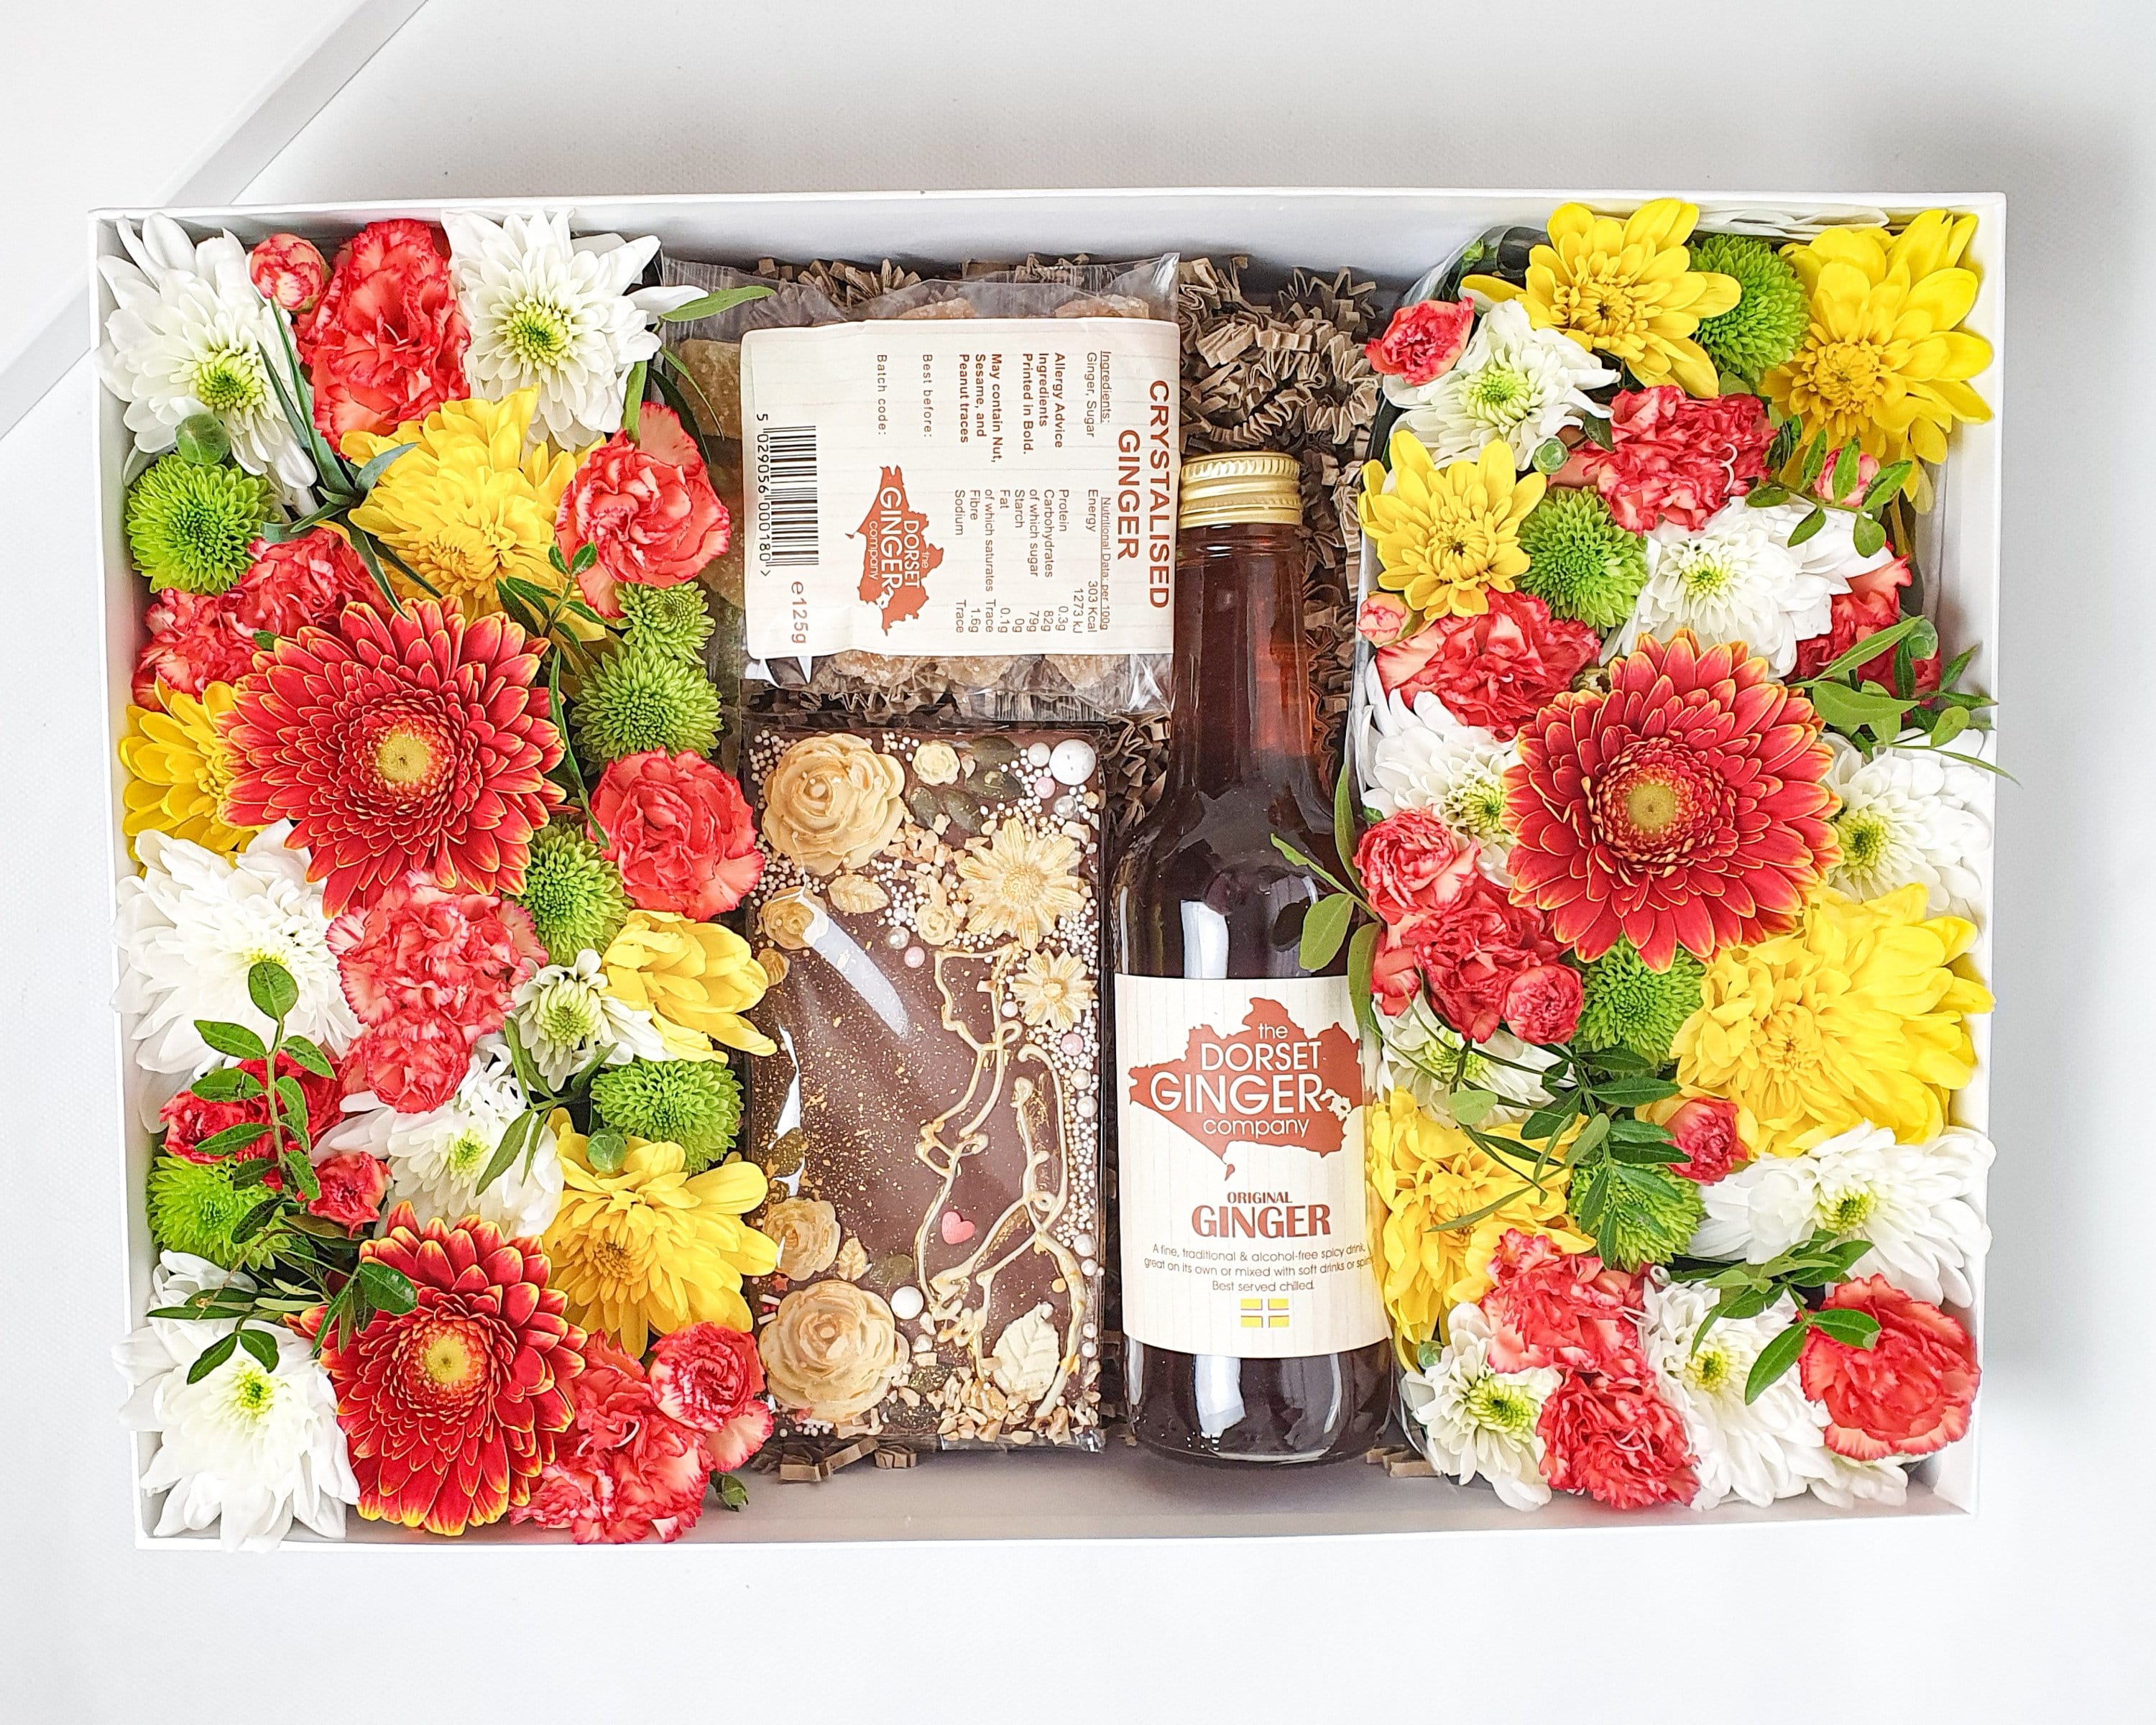 Pregnancy gift box special - Sisi food sculptor